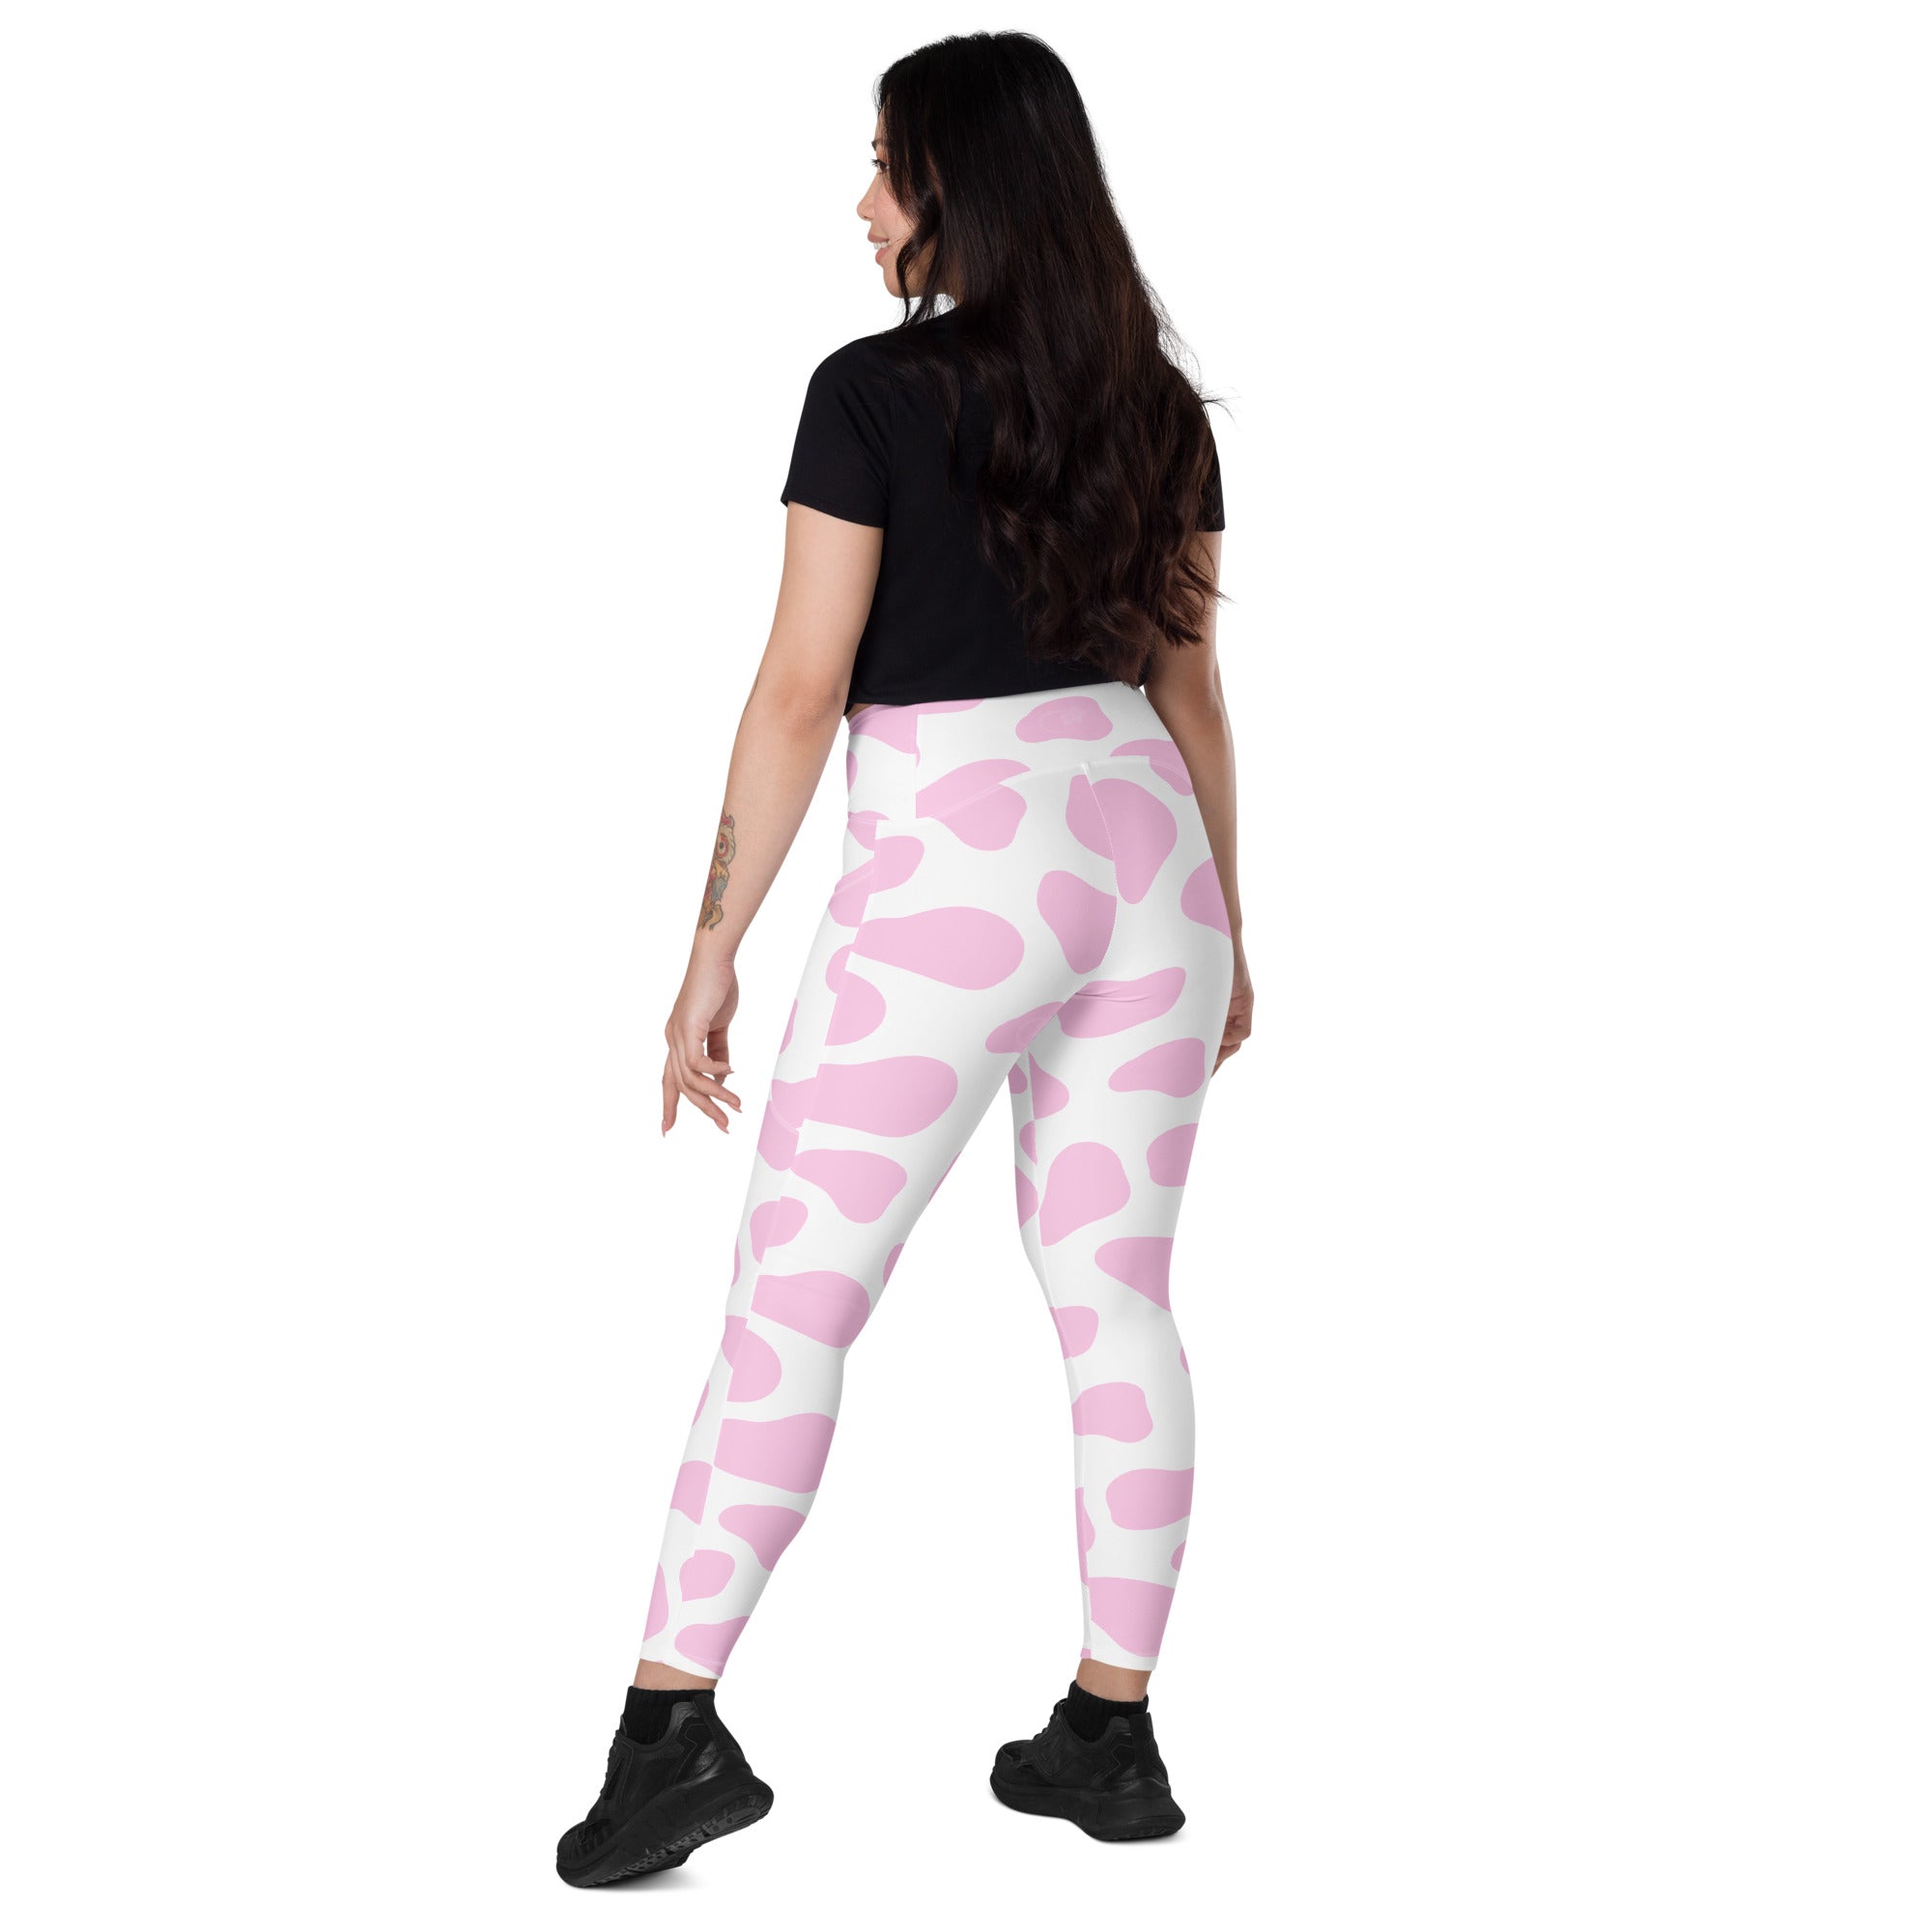 Pink Cow Leggings with pockets